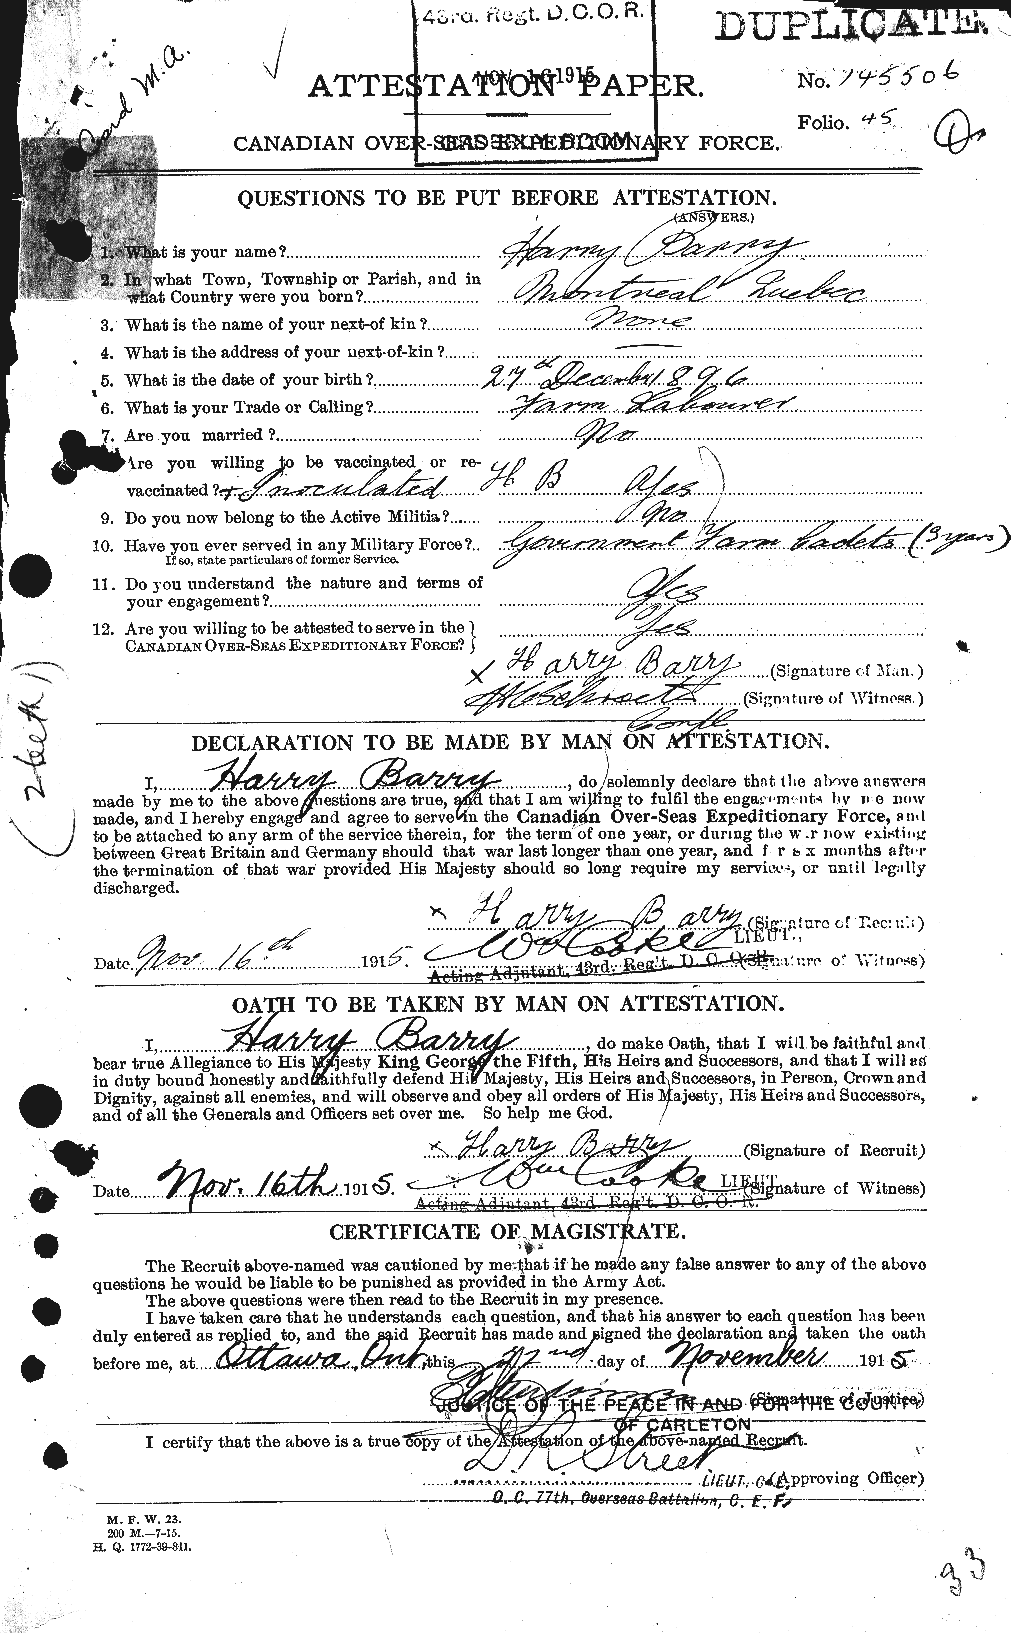 Personnel Records of the First World War - CEF 222162a